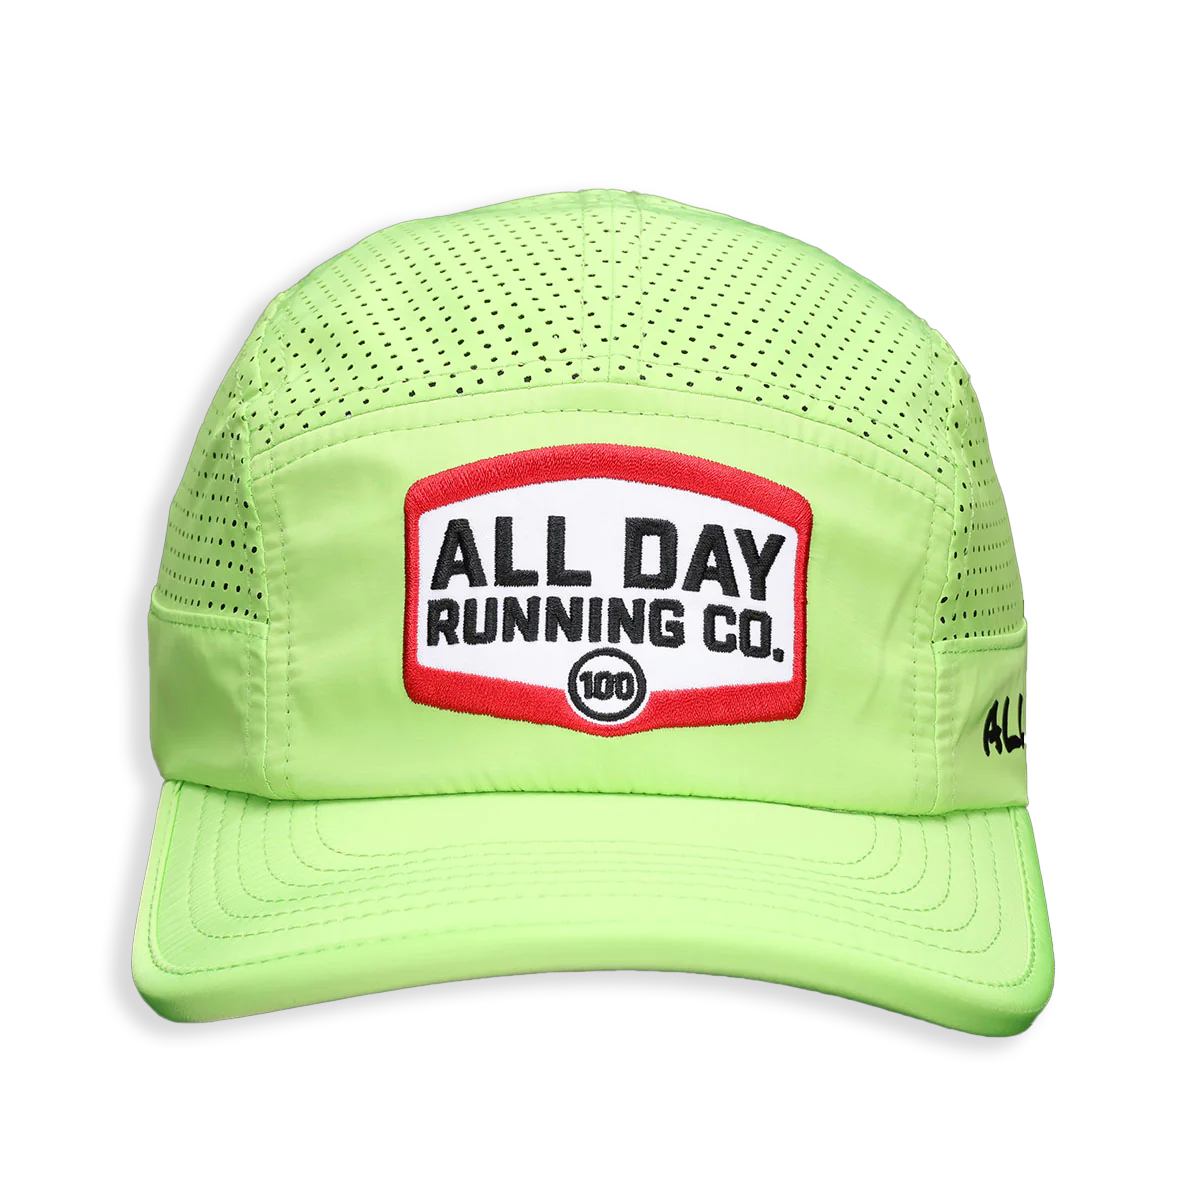 All Day Team Hats